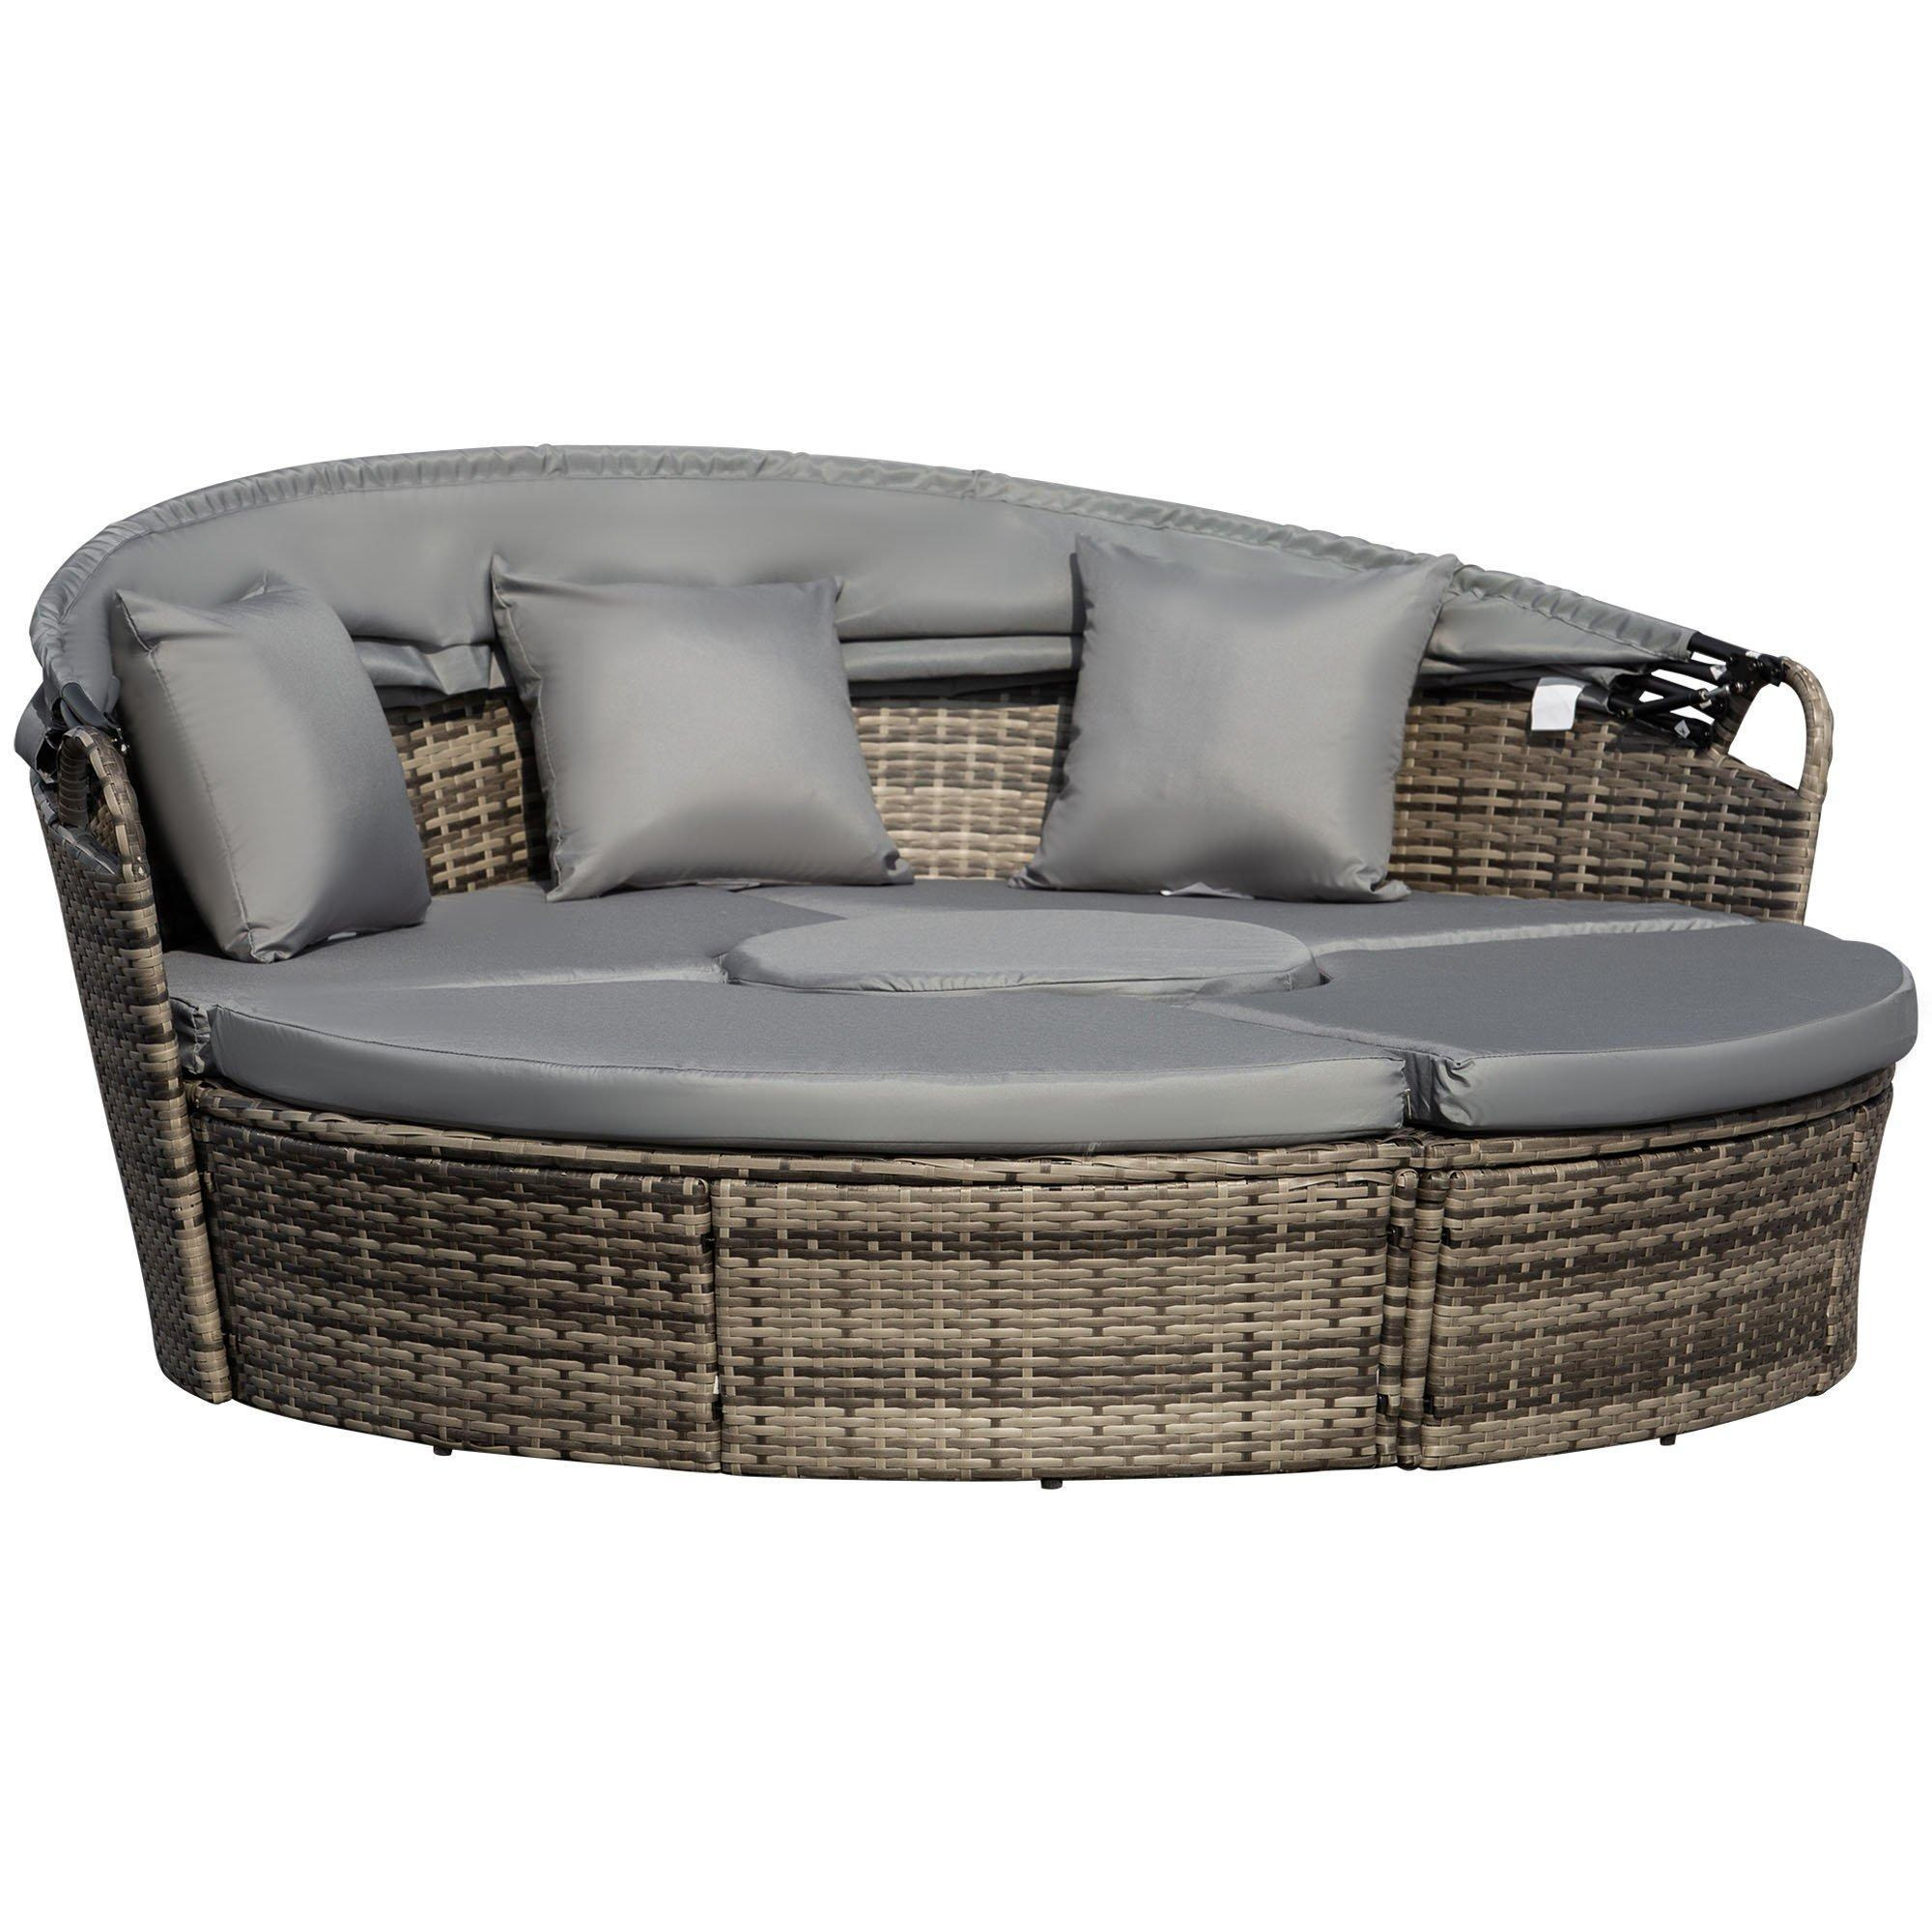 5 Piece Cushioned Outdoor Plastic Rattan Round Sofa Bed Coffee Table Set - image 1